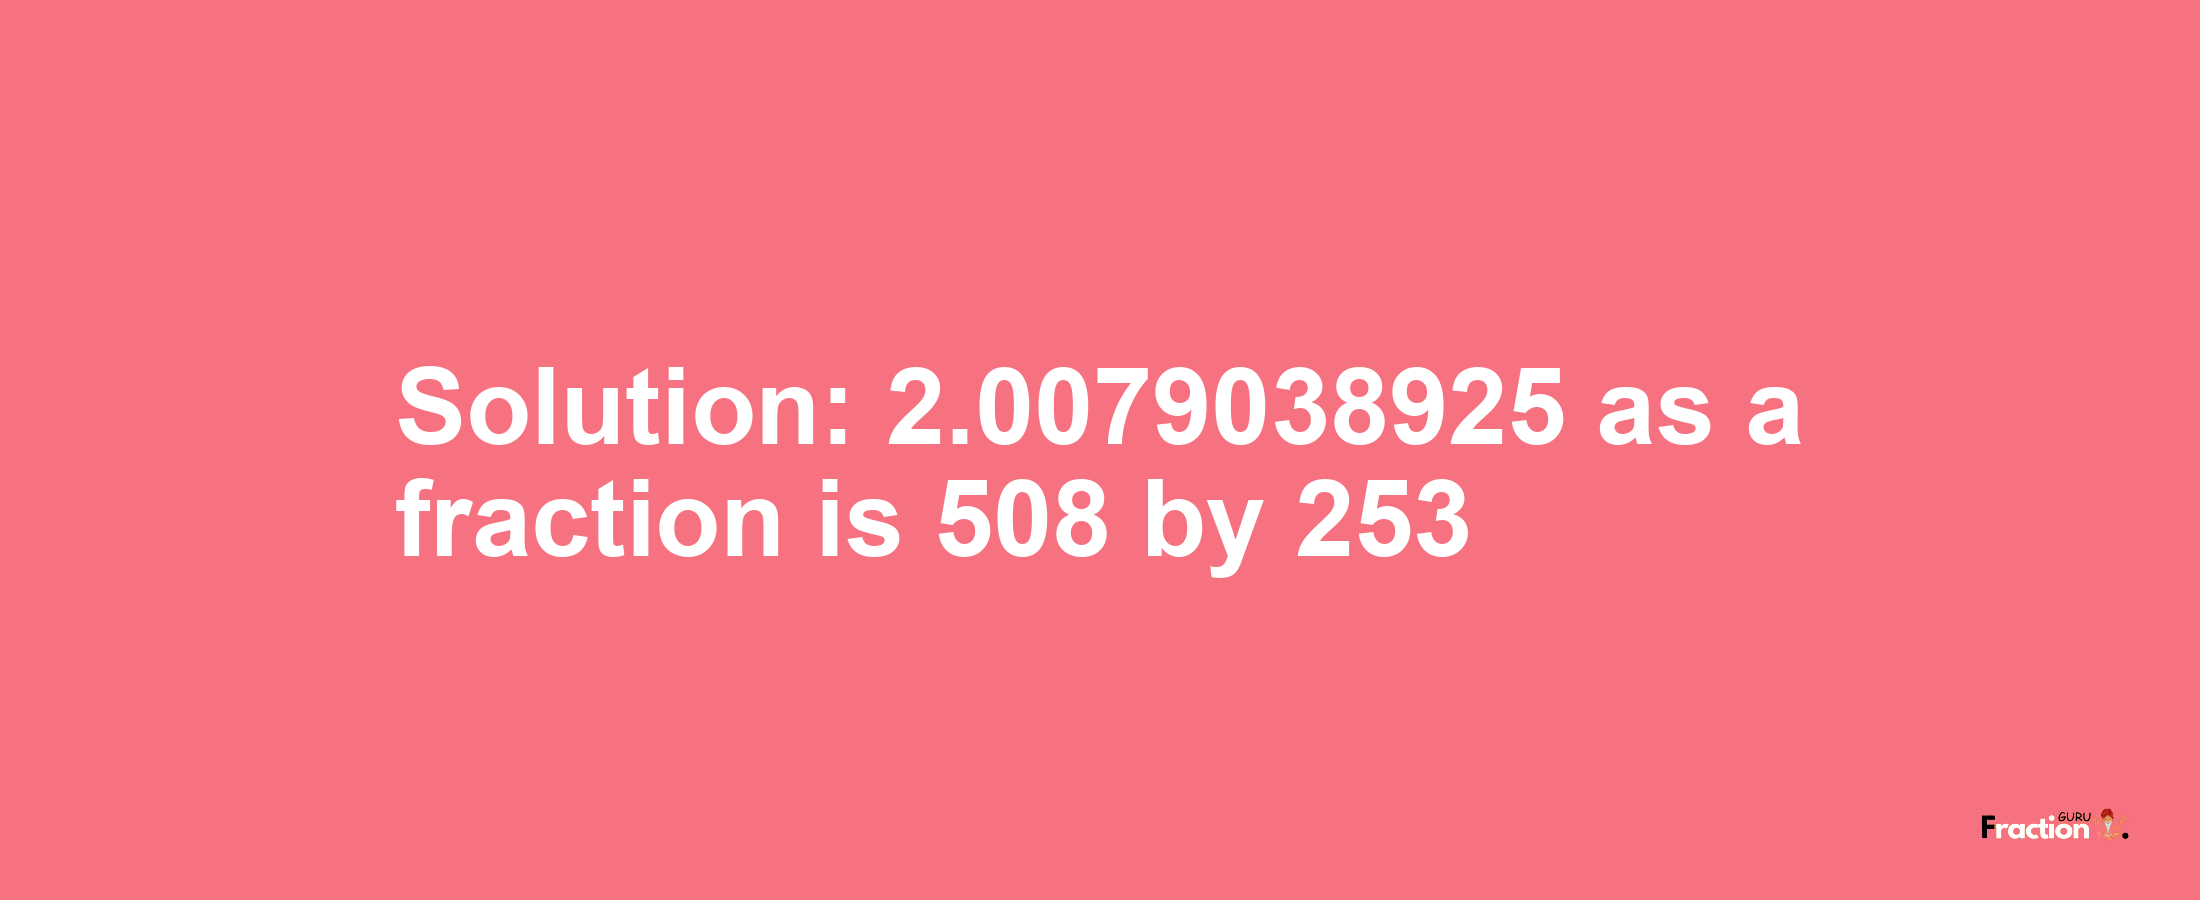 Solution:2.0079038925 as a fraction is 508/253